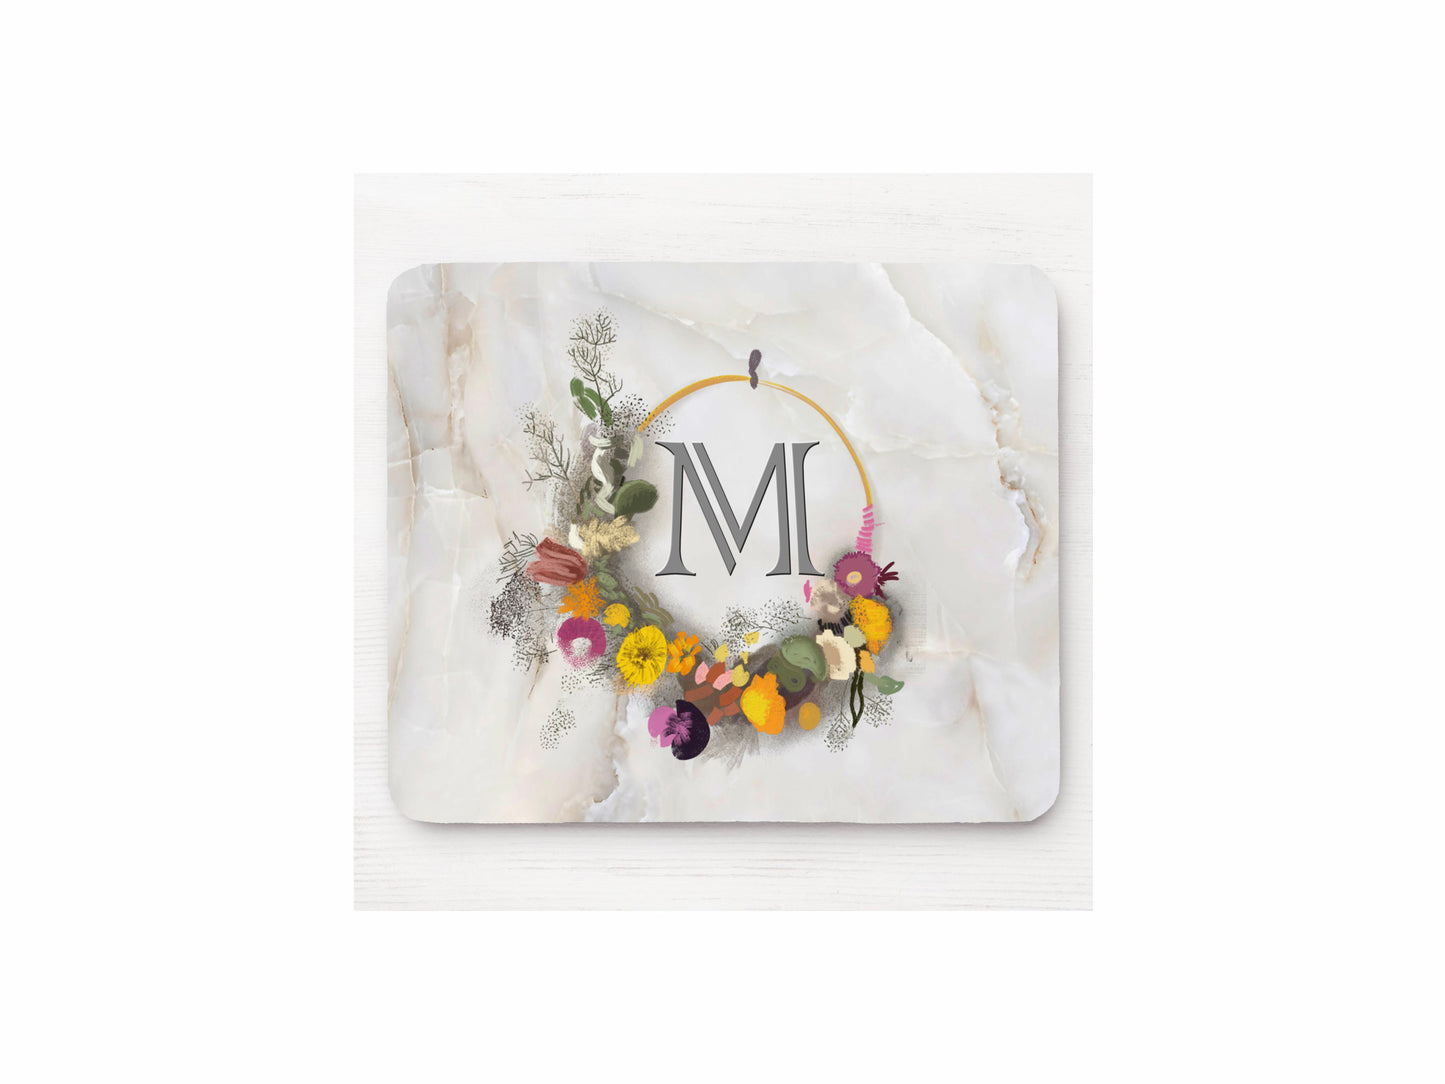 Personalised Mouse Pad | Mousemat Gift | Wreath with Initial Style